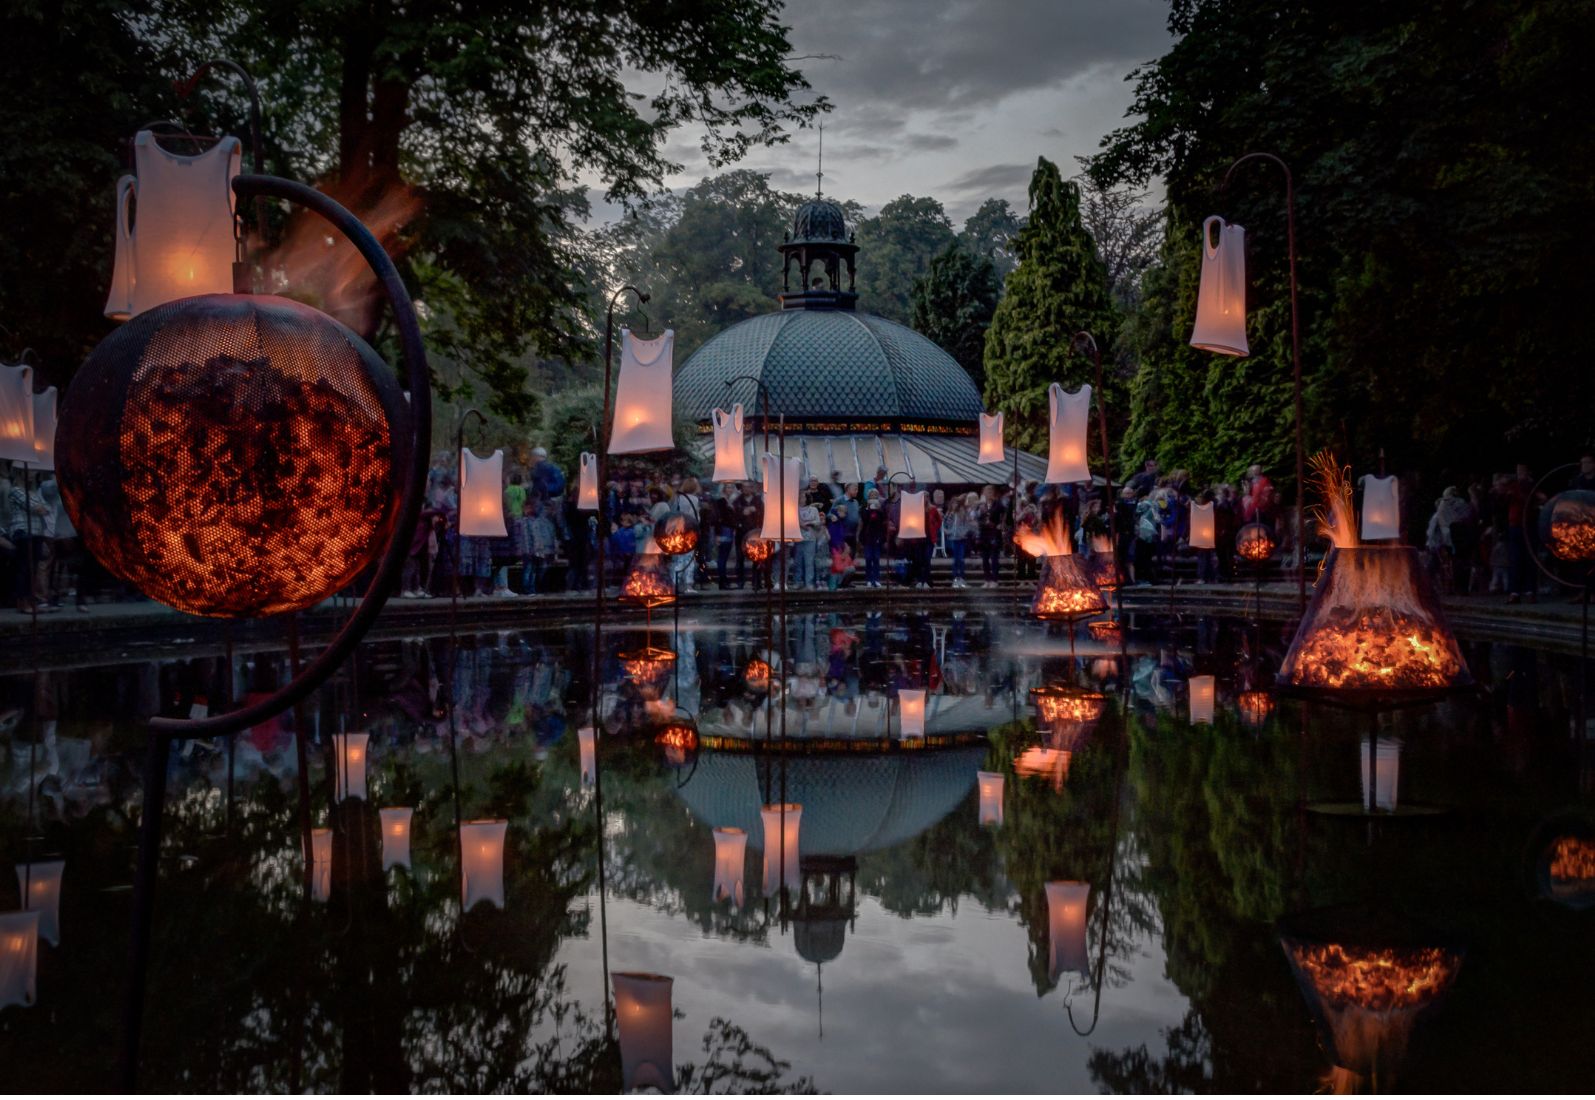 The Fire Festival was commissioned by Harrogate International Festivals